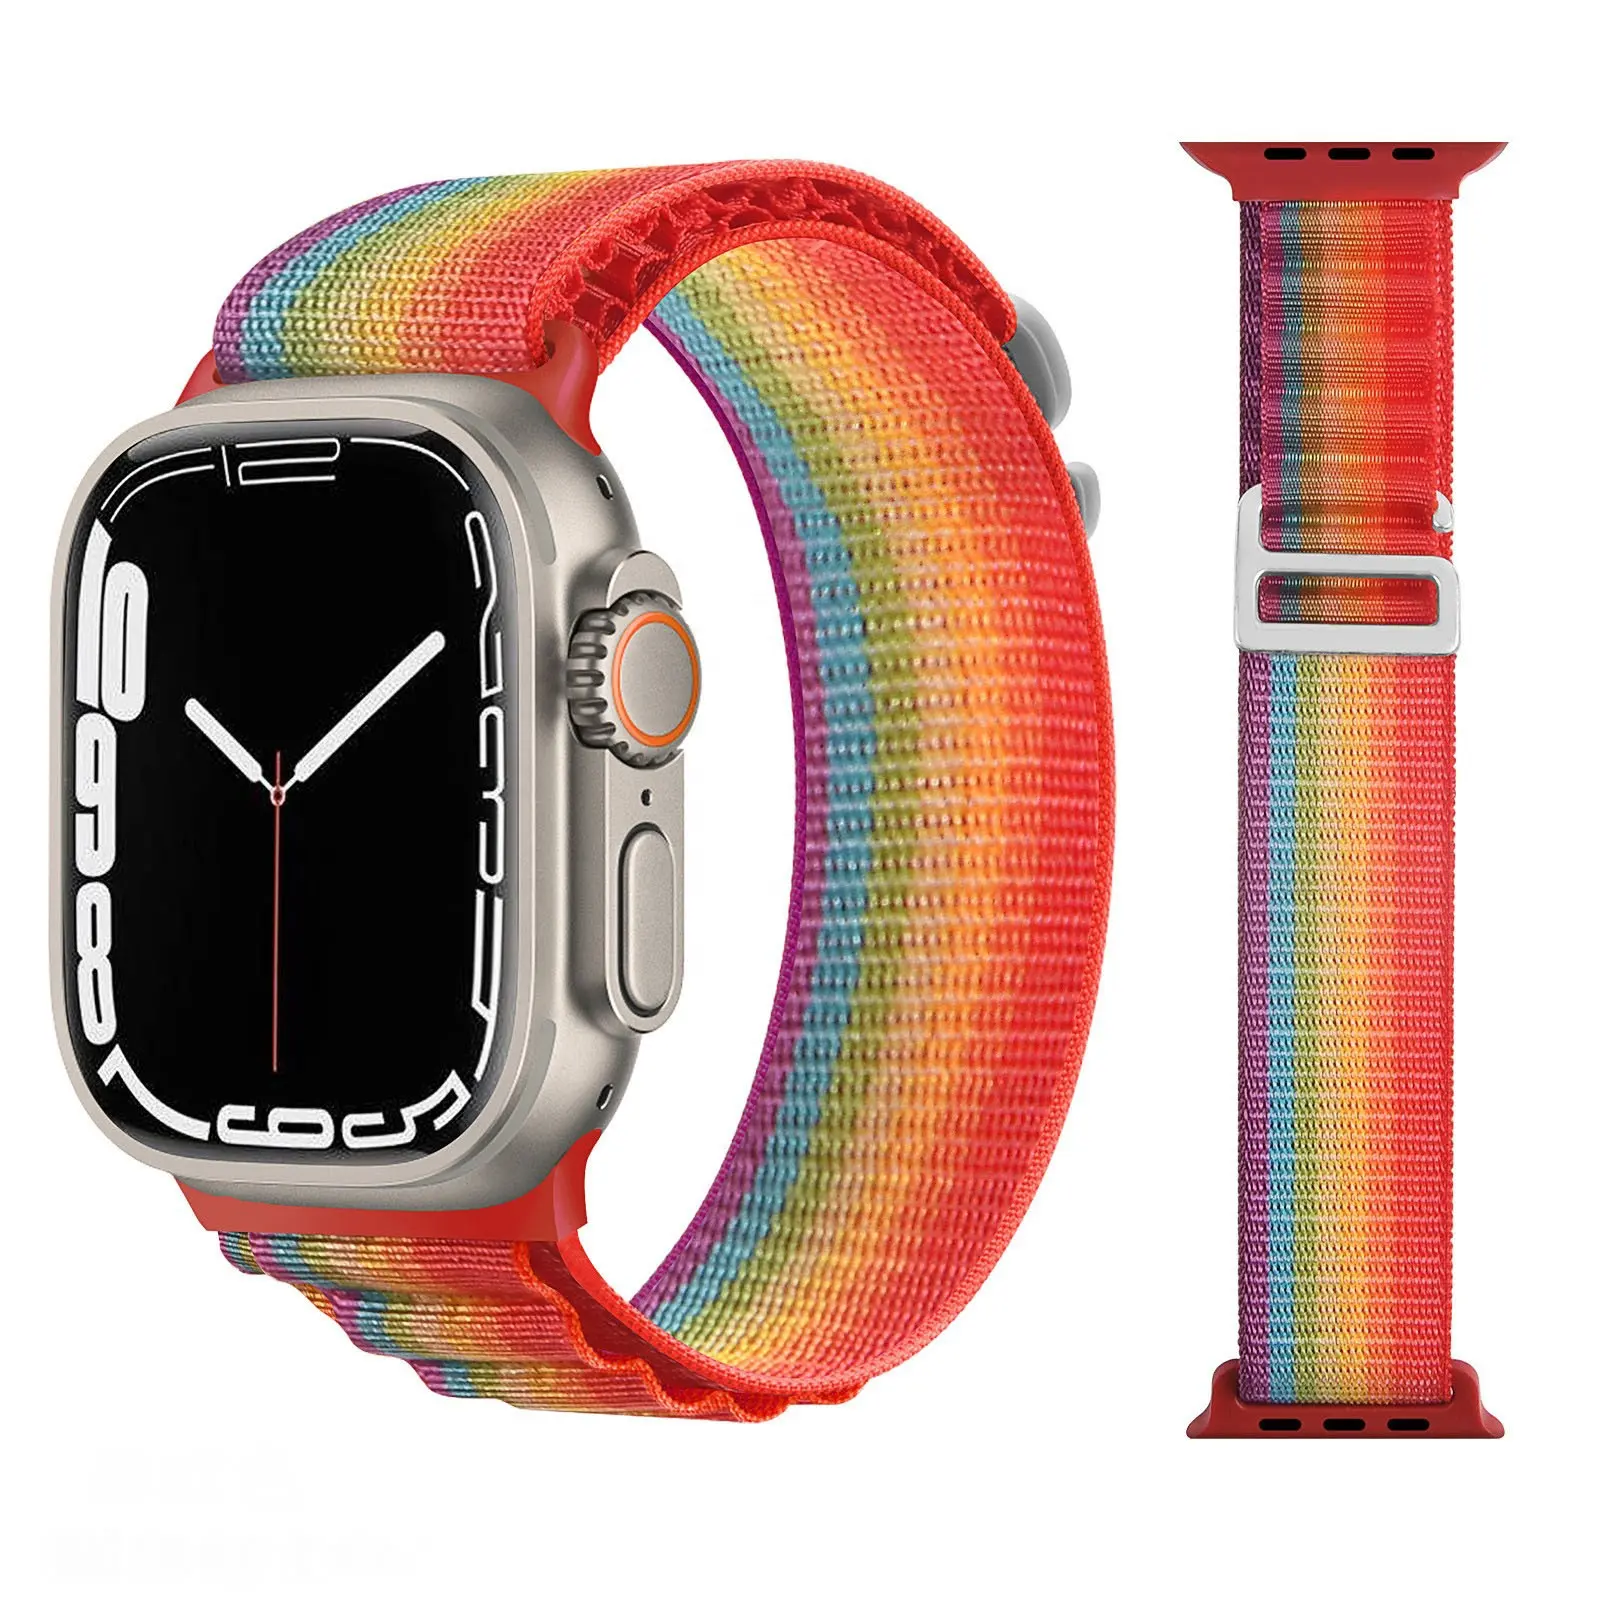 The new Alpine watchband is suitable for apple watch8 generation nylon braided metal buckle men's and women's braided watchbands